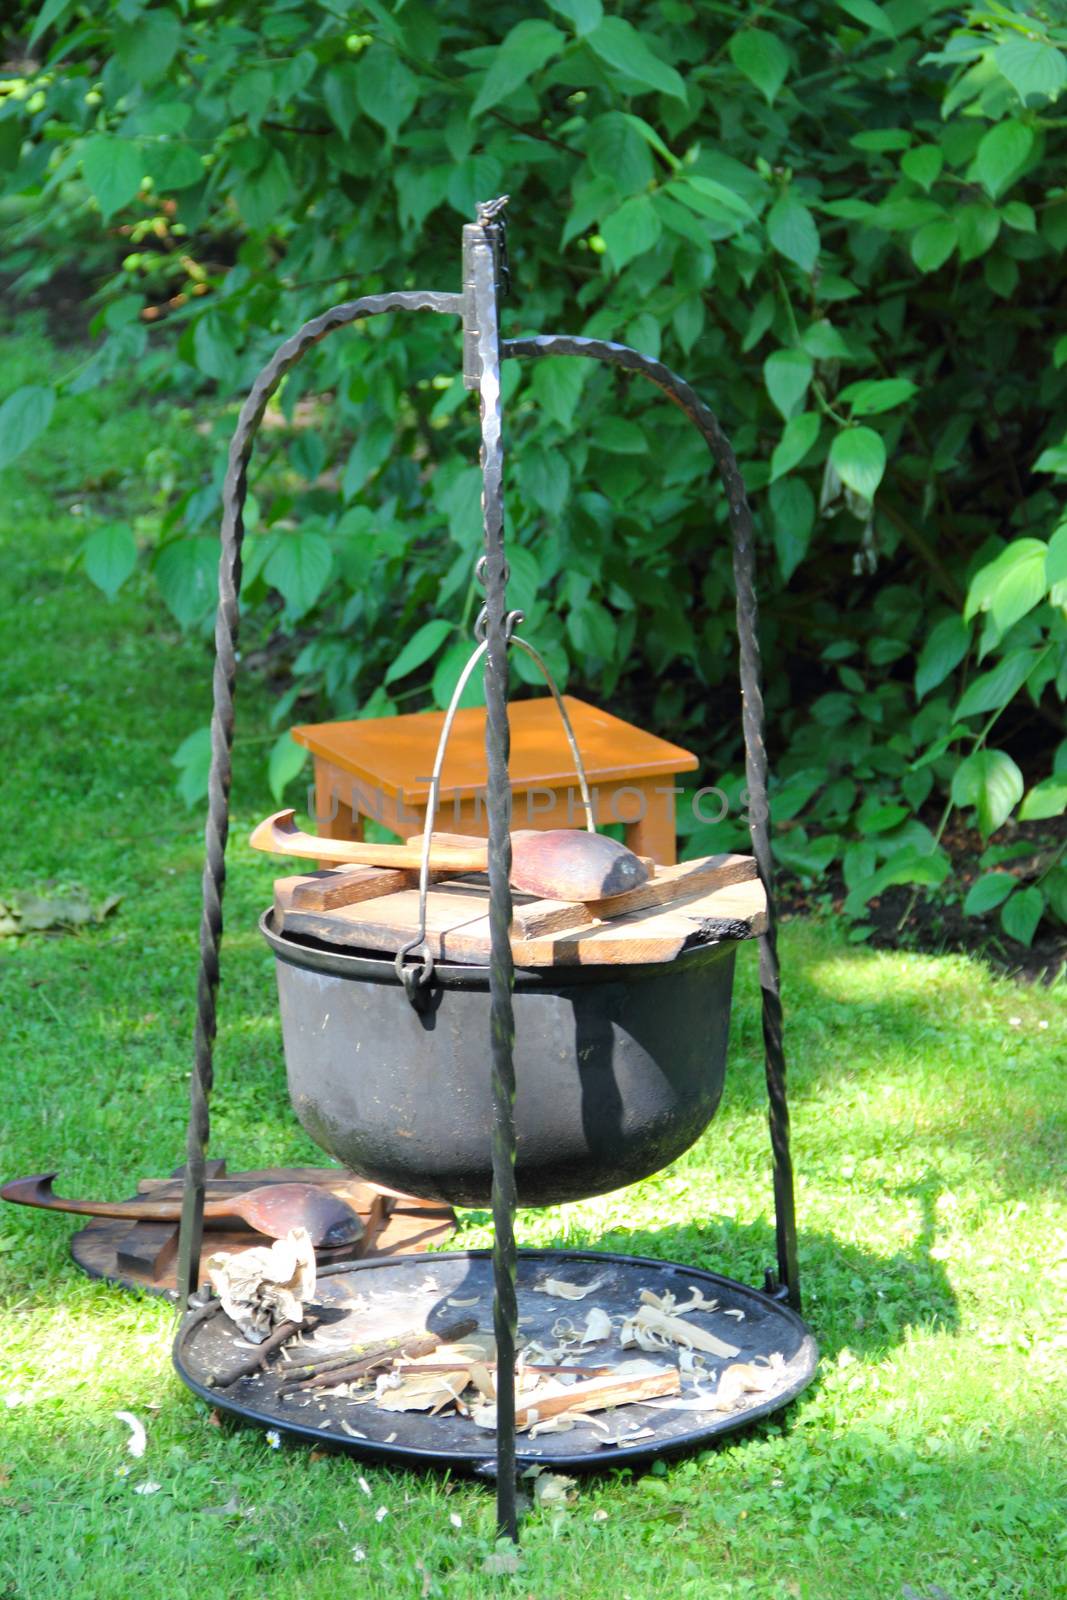 Witches black kettle and firewood on forged stand on green grass